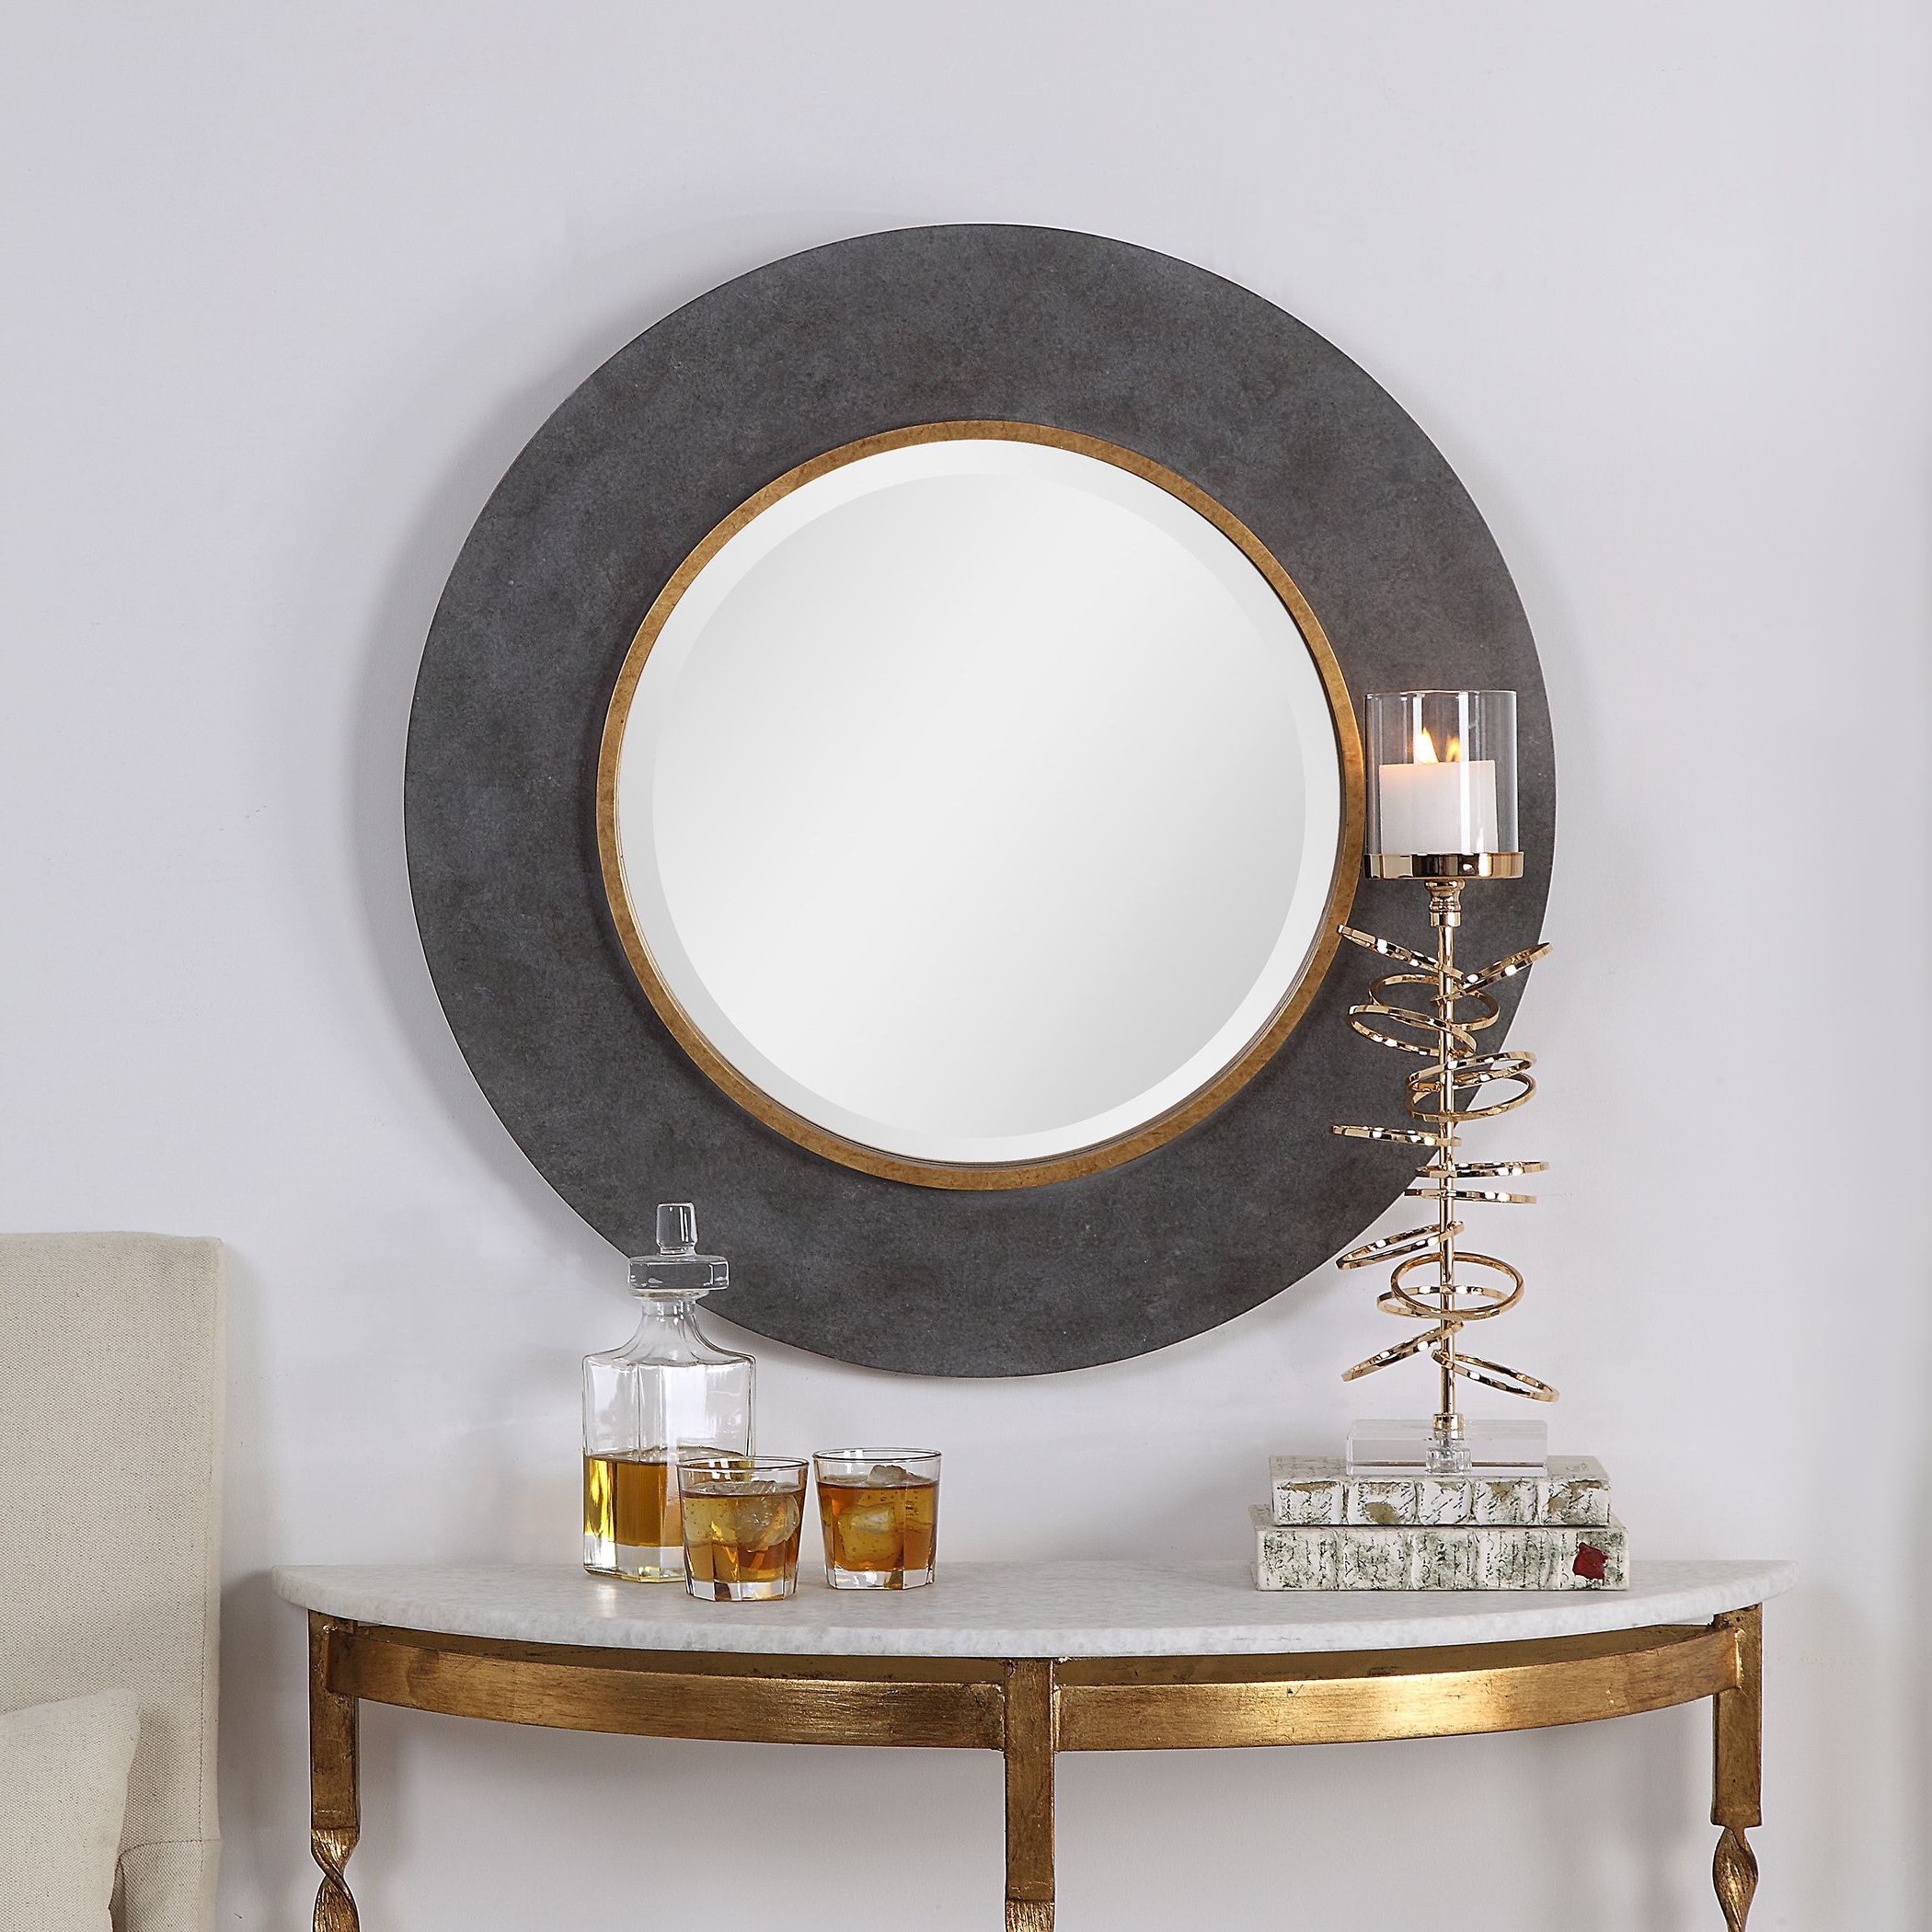 Large Round Wood Beveled Wall Mirror Contemporary Charcoal Concrete Regarding Famous Charcoal Gray Wall Mirrors (View 11 of 15)